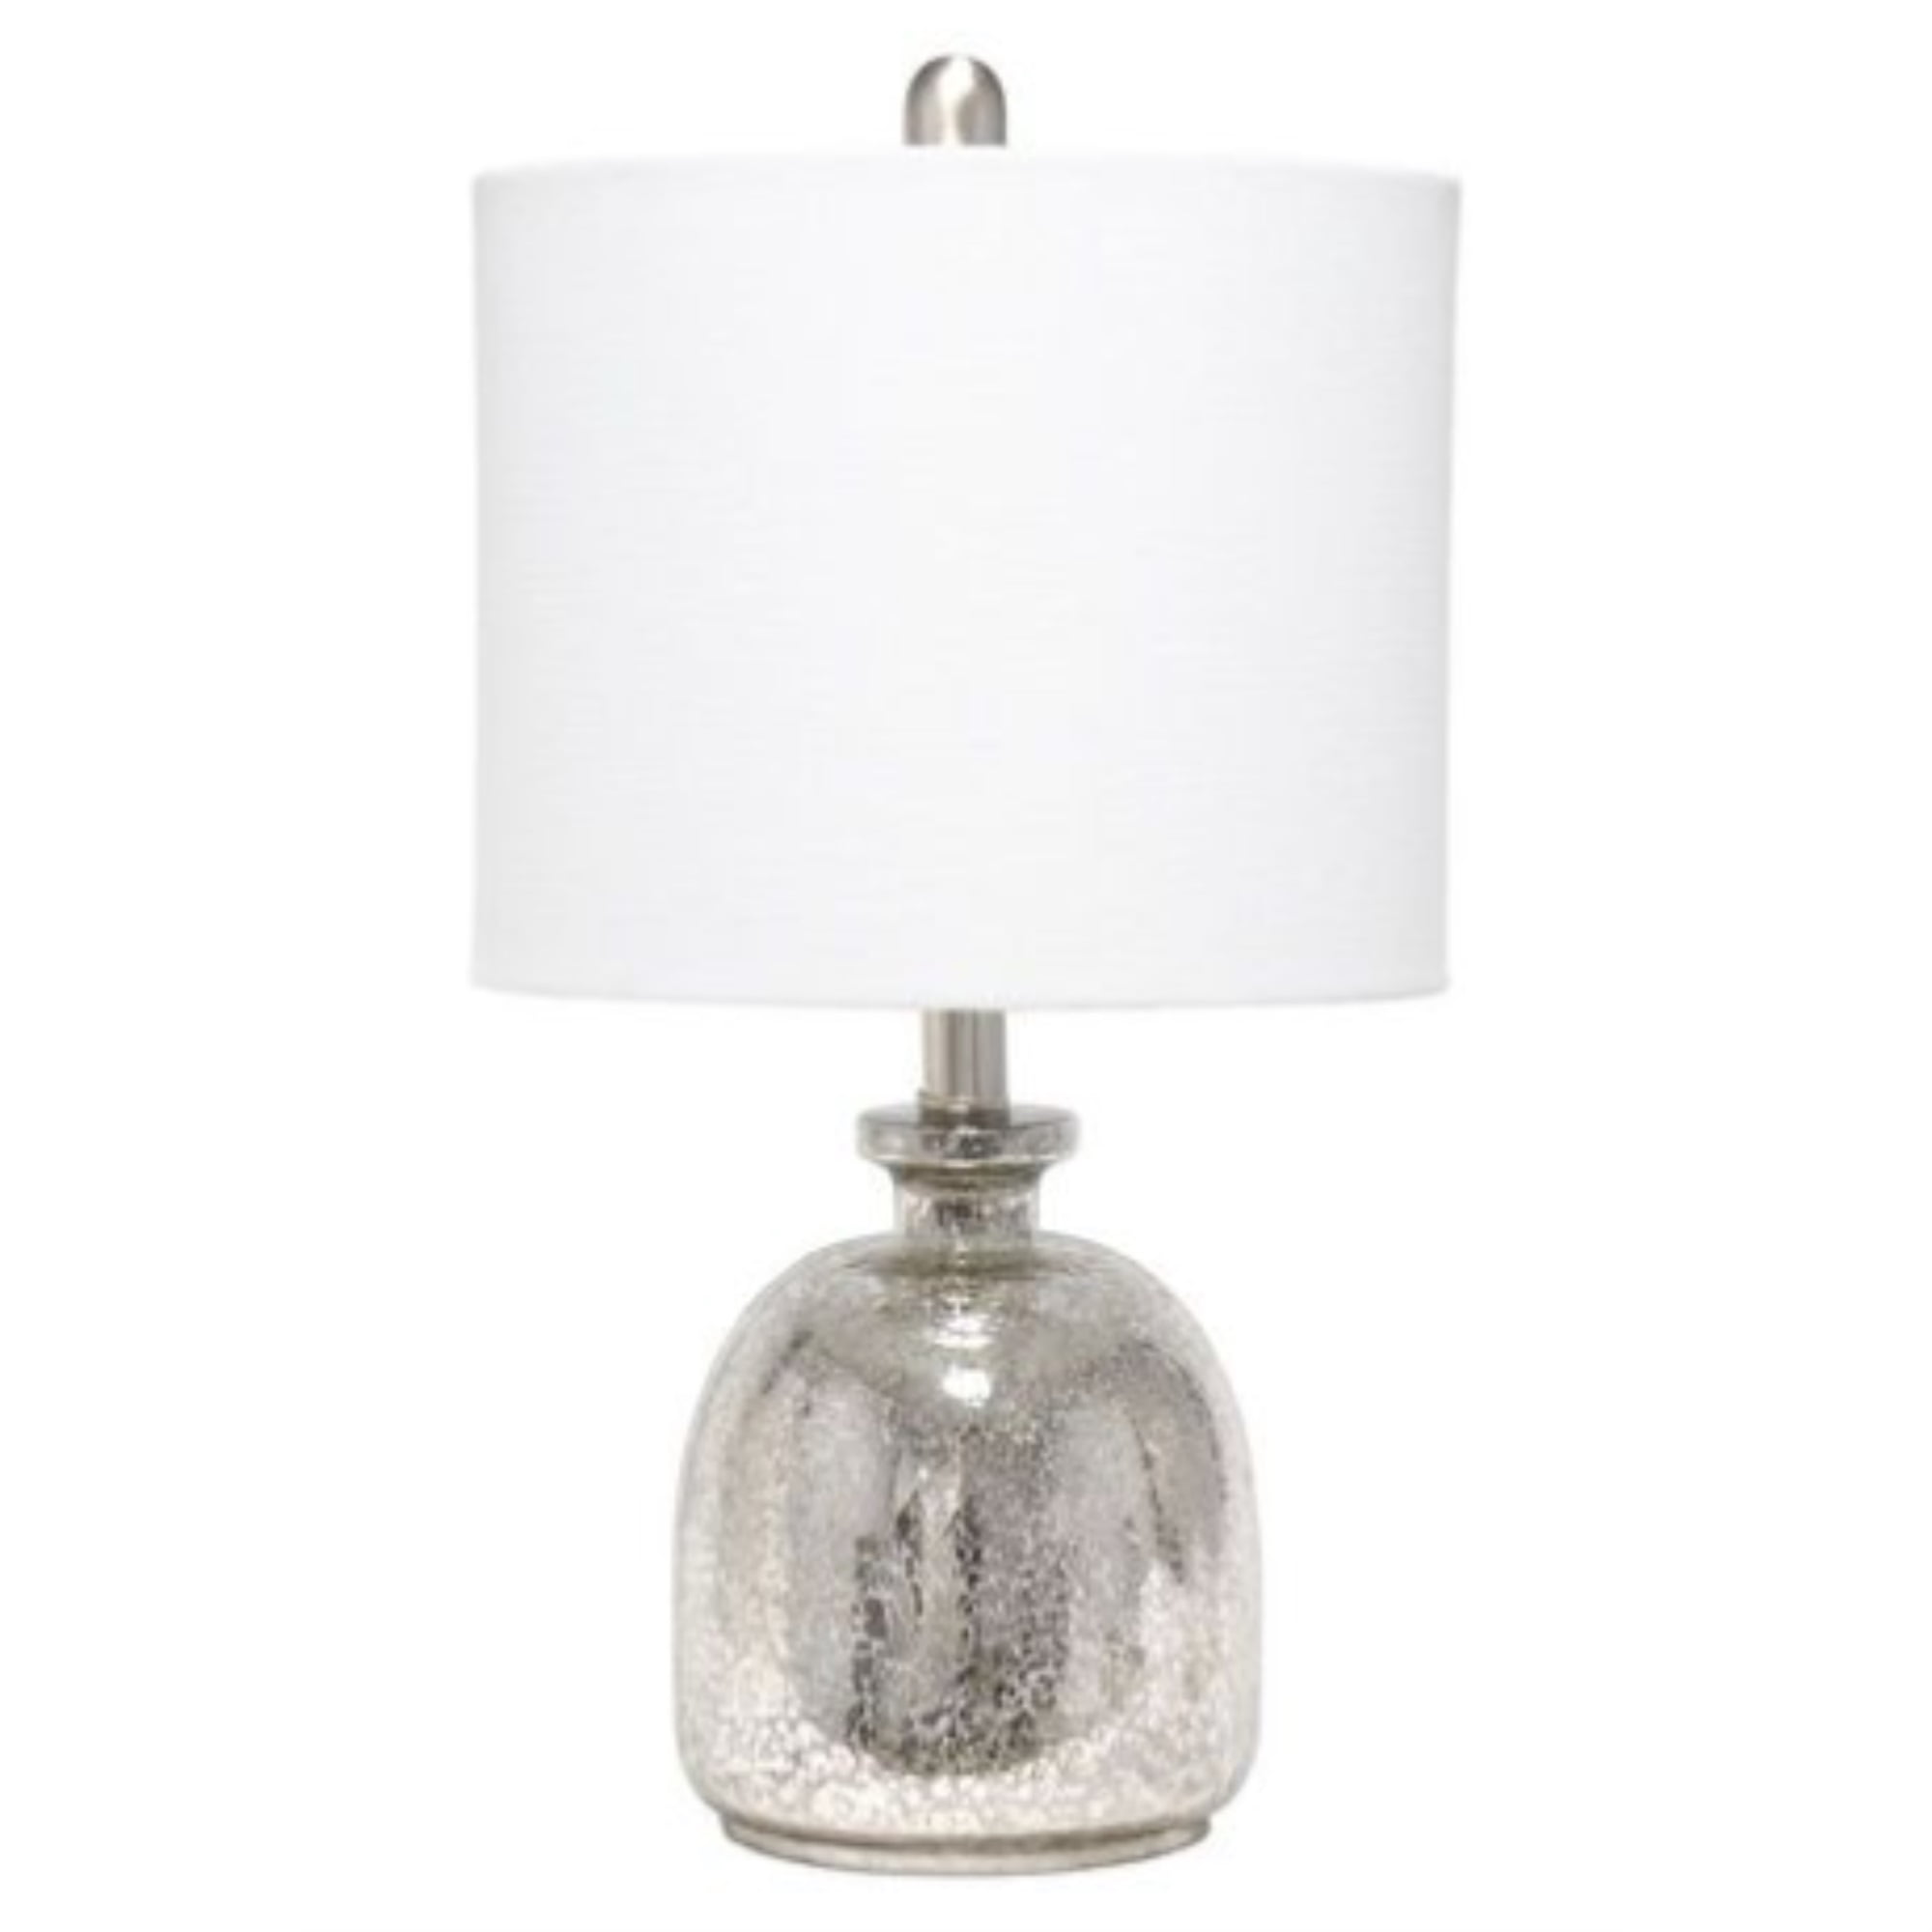 Lalia Home Mercury Hammered Glass Jar Table Lamp with White Linen Shade